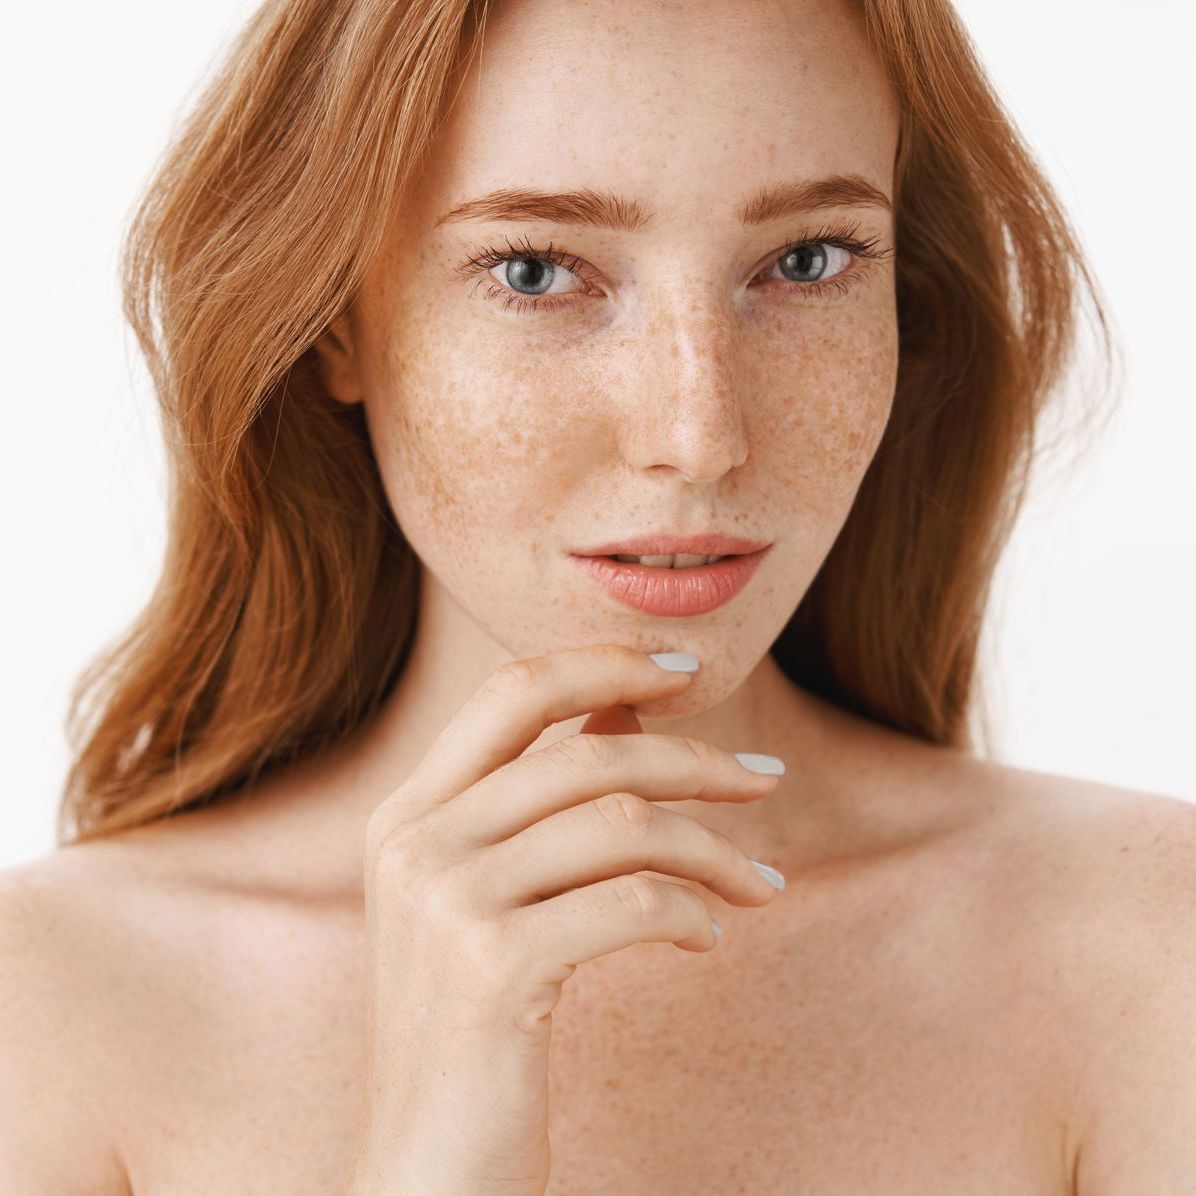 A woman with red hair and freckles is holding her hand to her face.